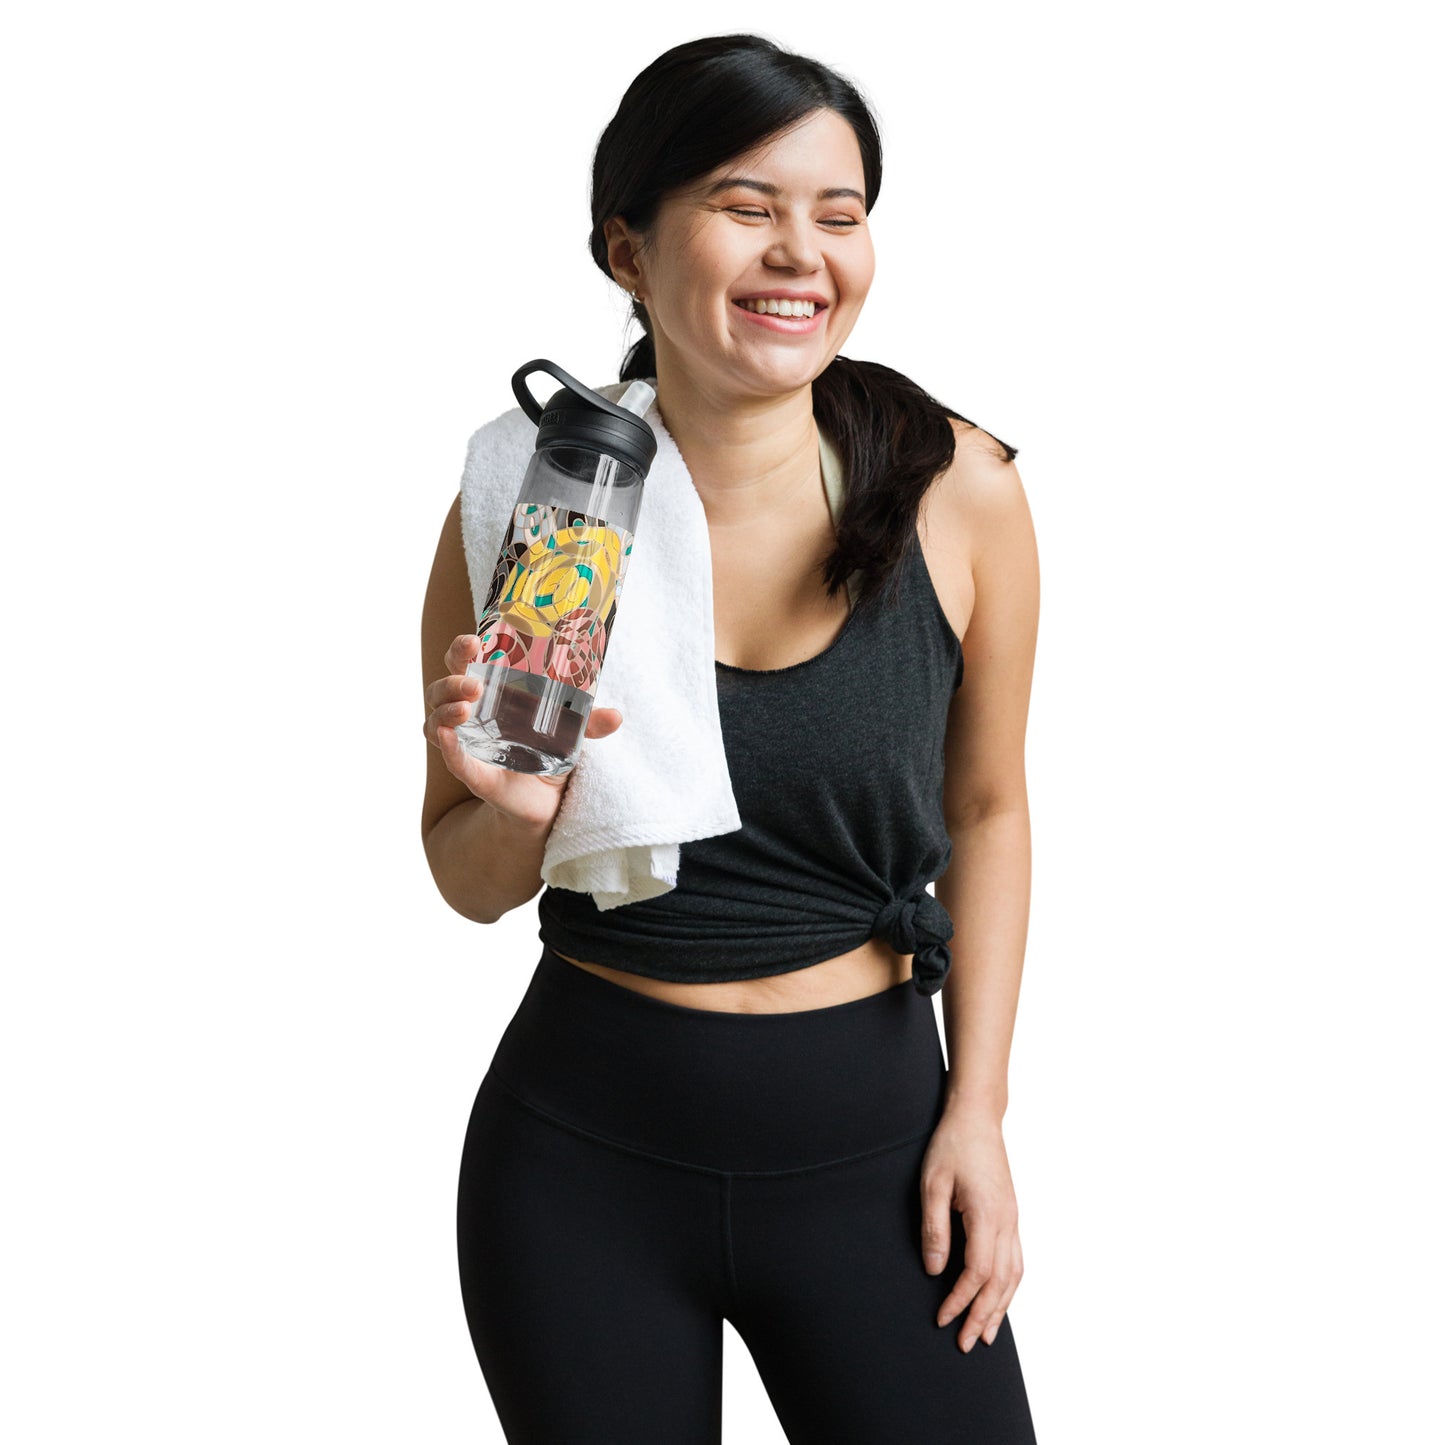 Red and Yellow, Black and White Sports water bottle